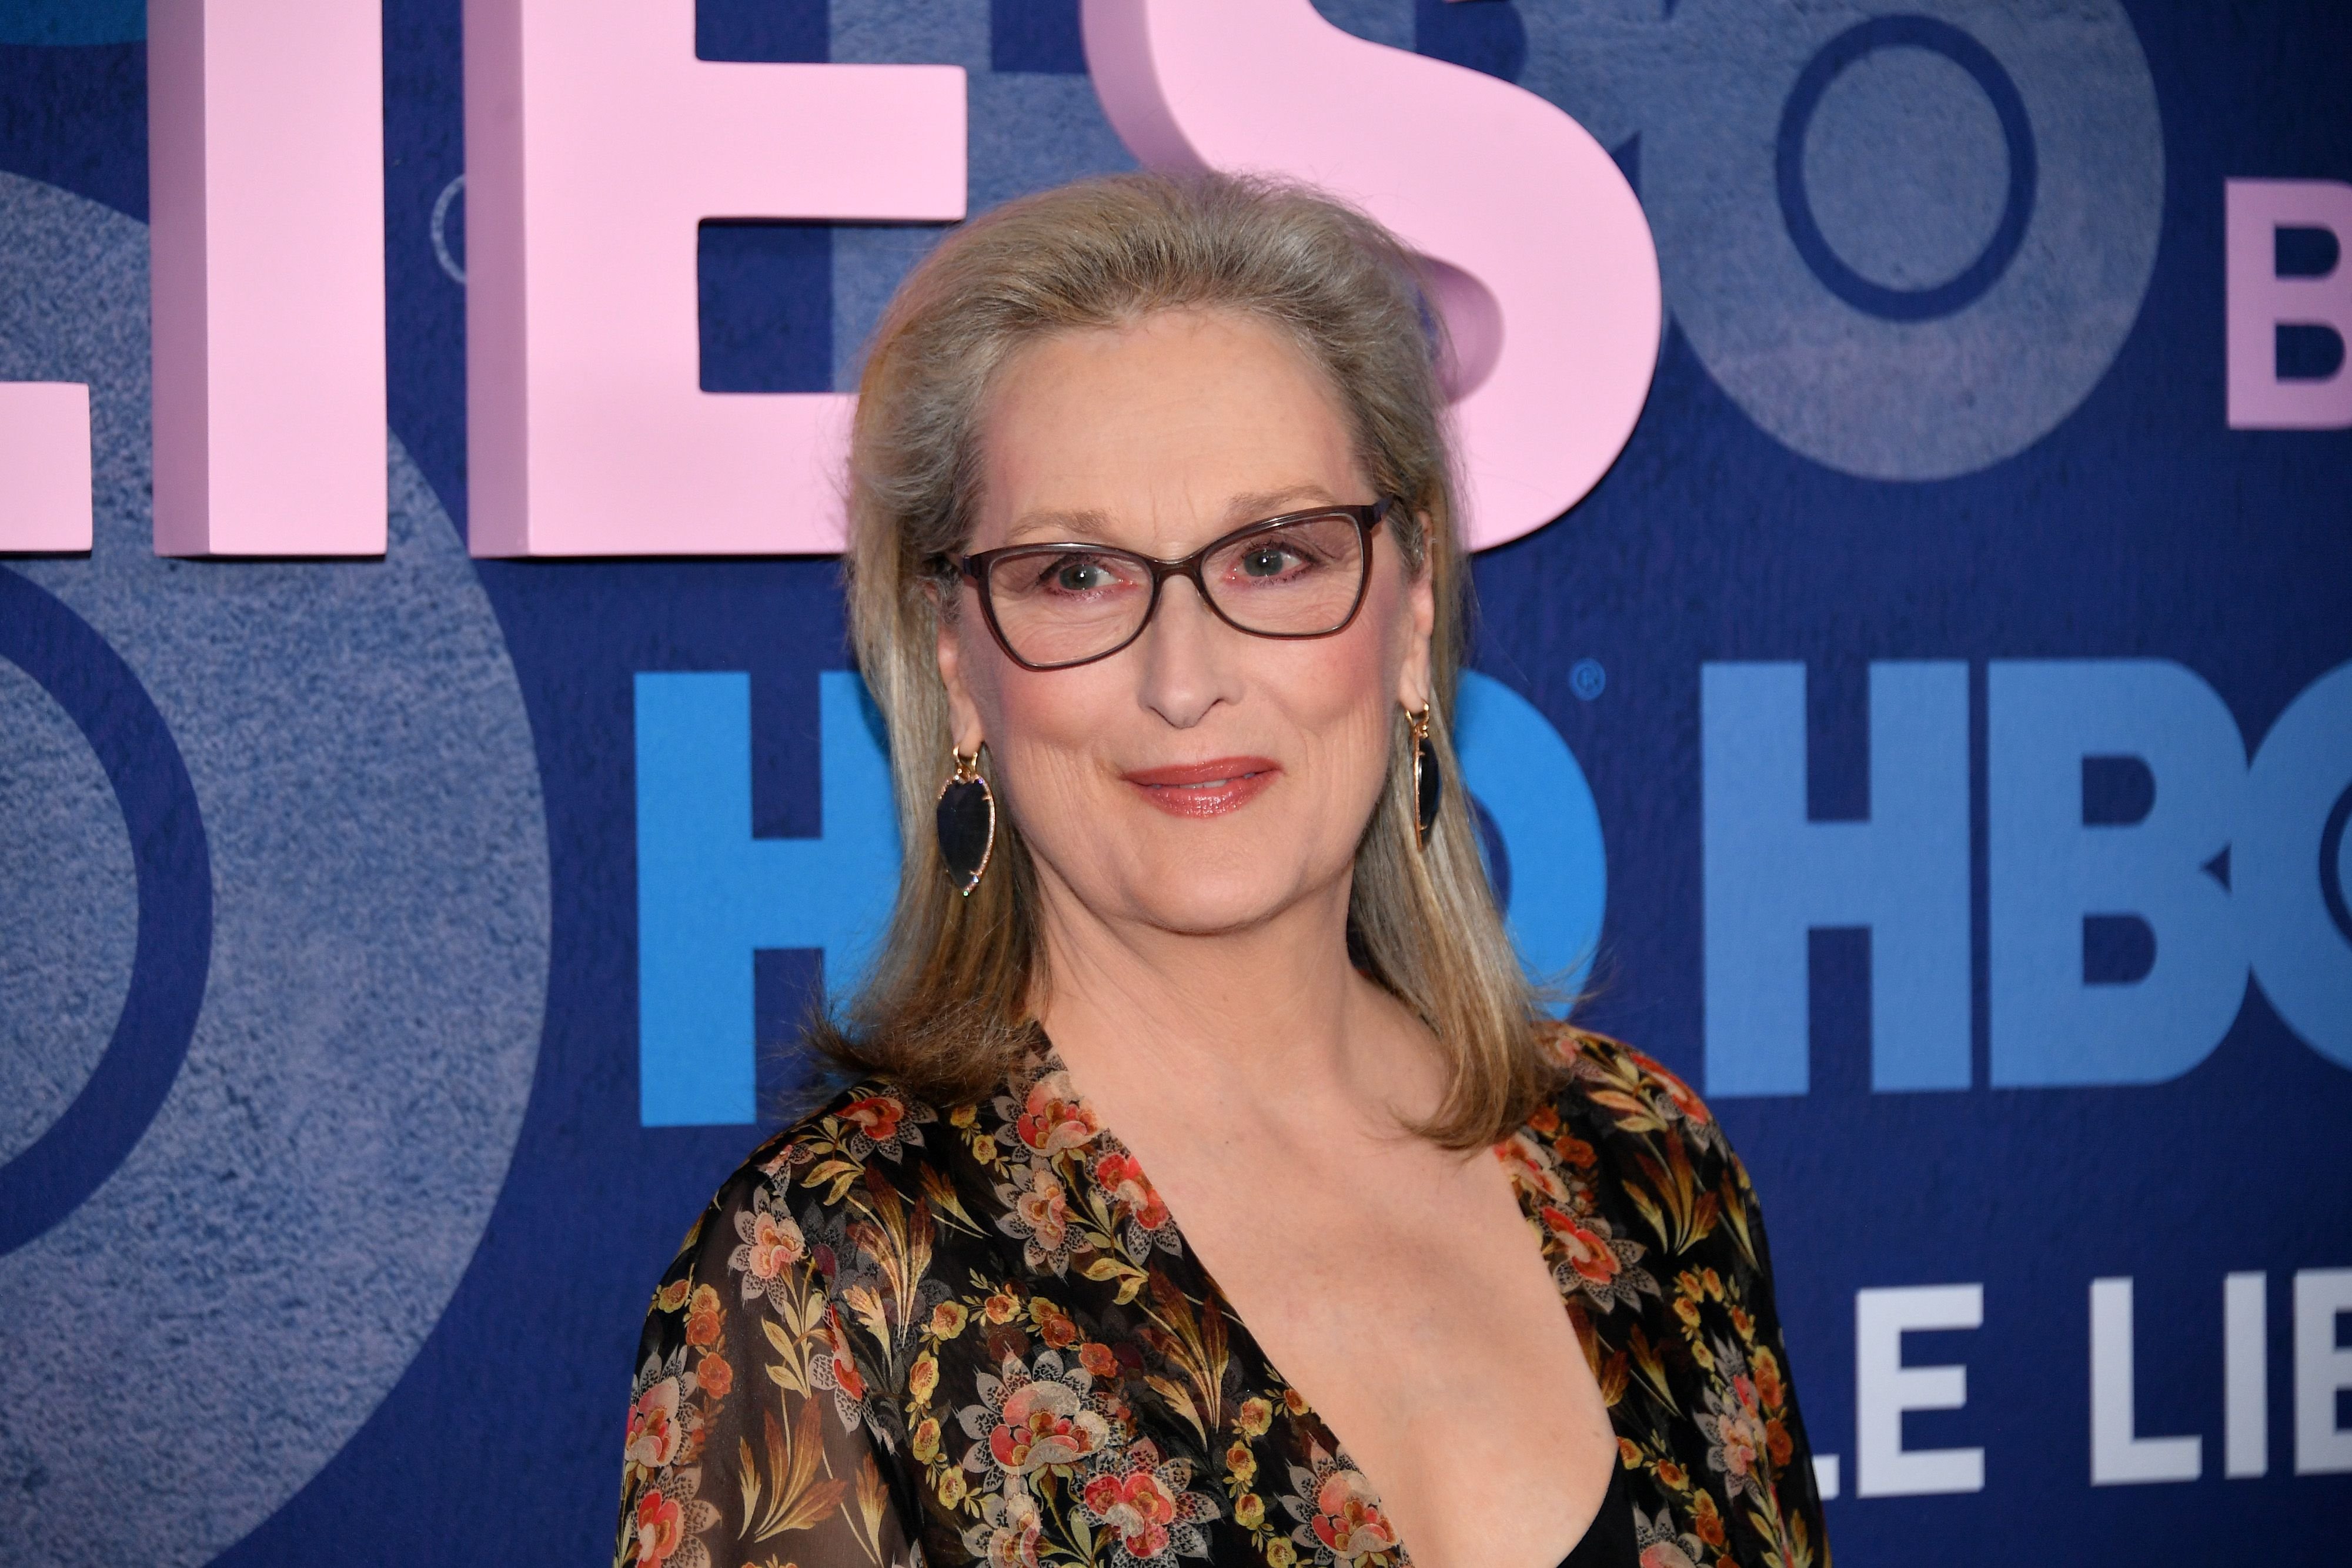 Meryl Streep at the "Big Little Lies" Season 2 Premiere at Jazz at Lincoln Center on May 29, 2019 | Photo: Getty Images